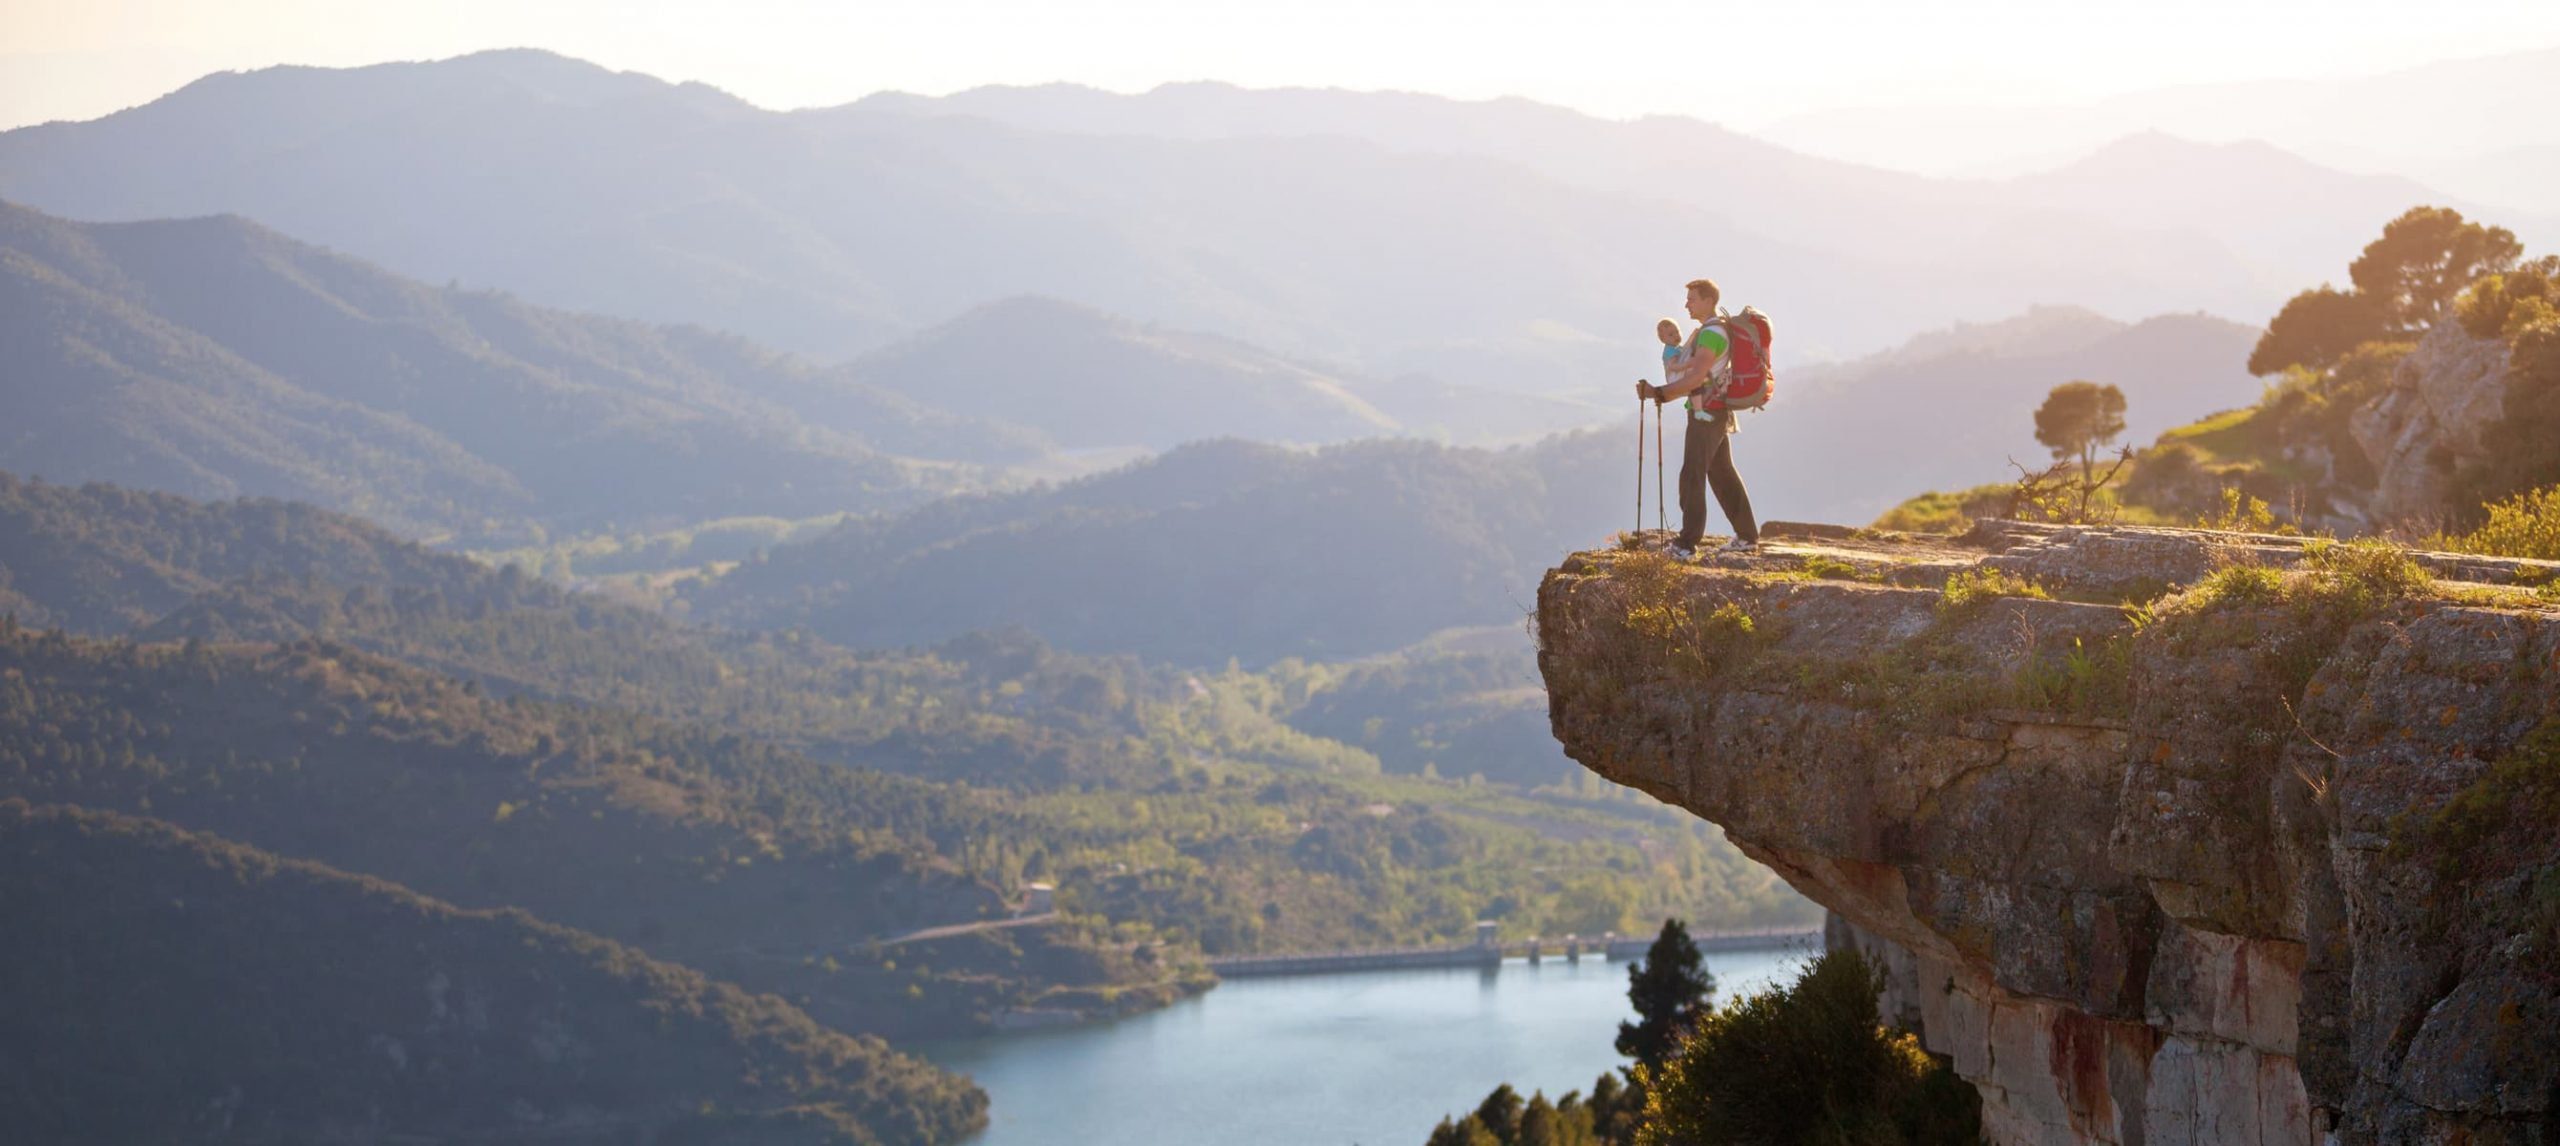 Hiker with baby relaxing on cliff and enjoying valley view. Siurana, Spain